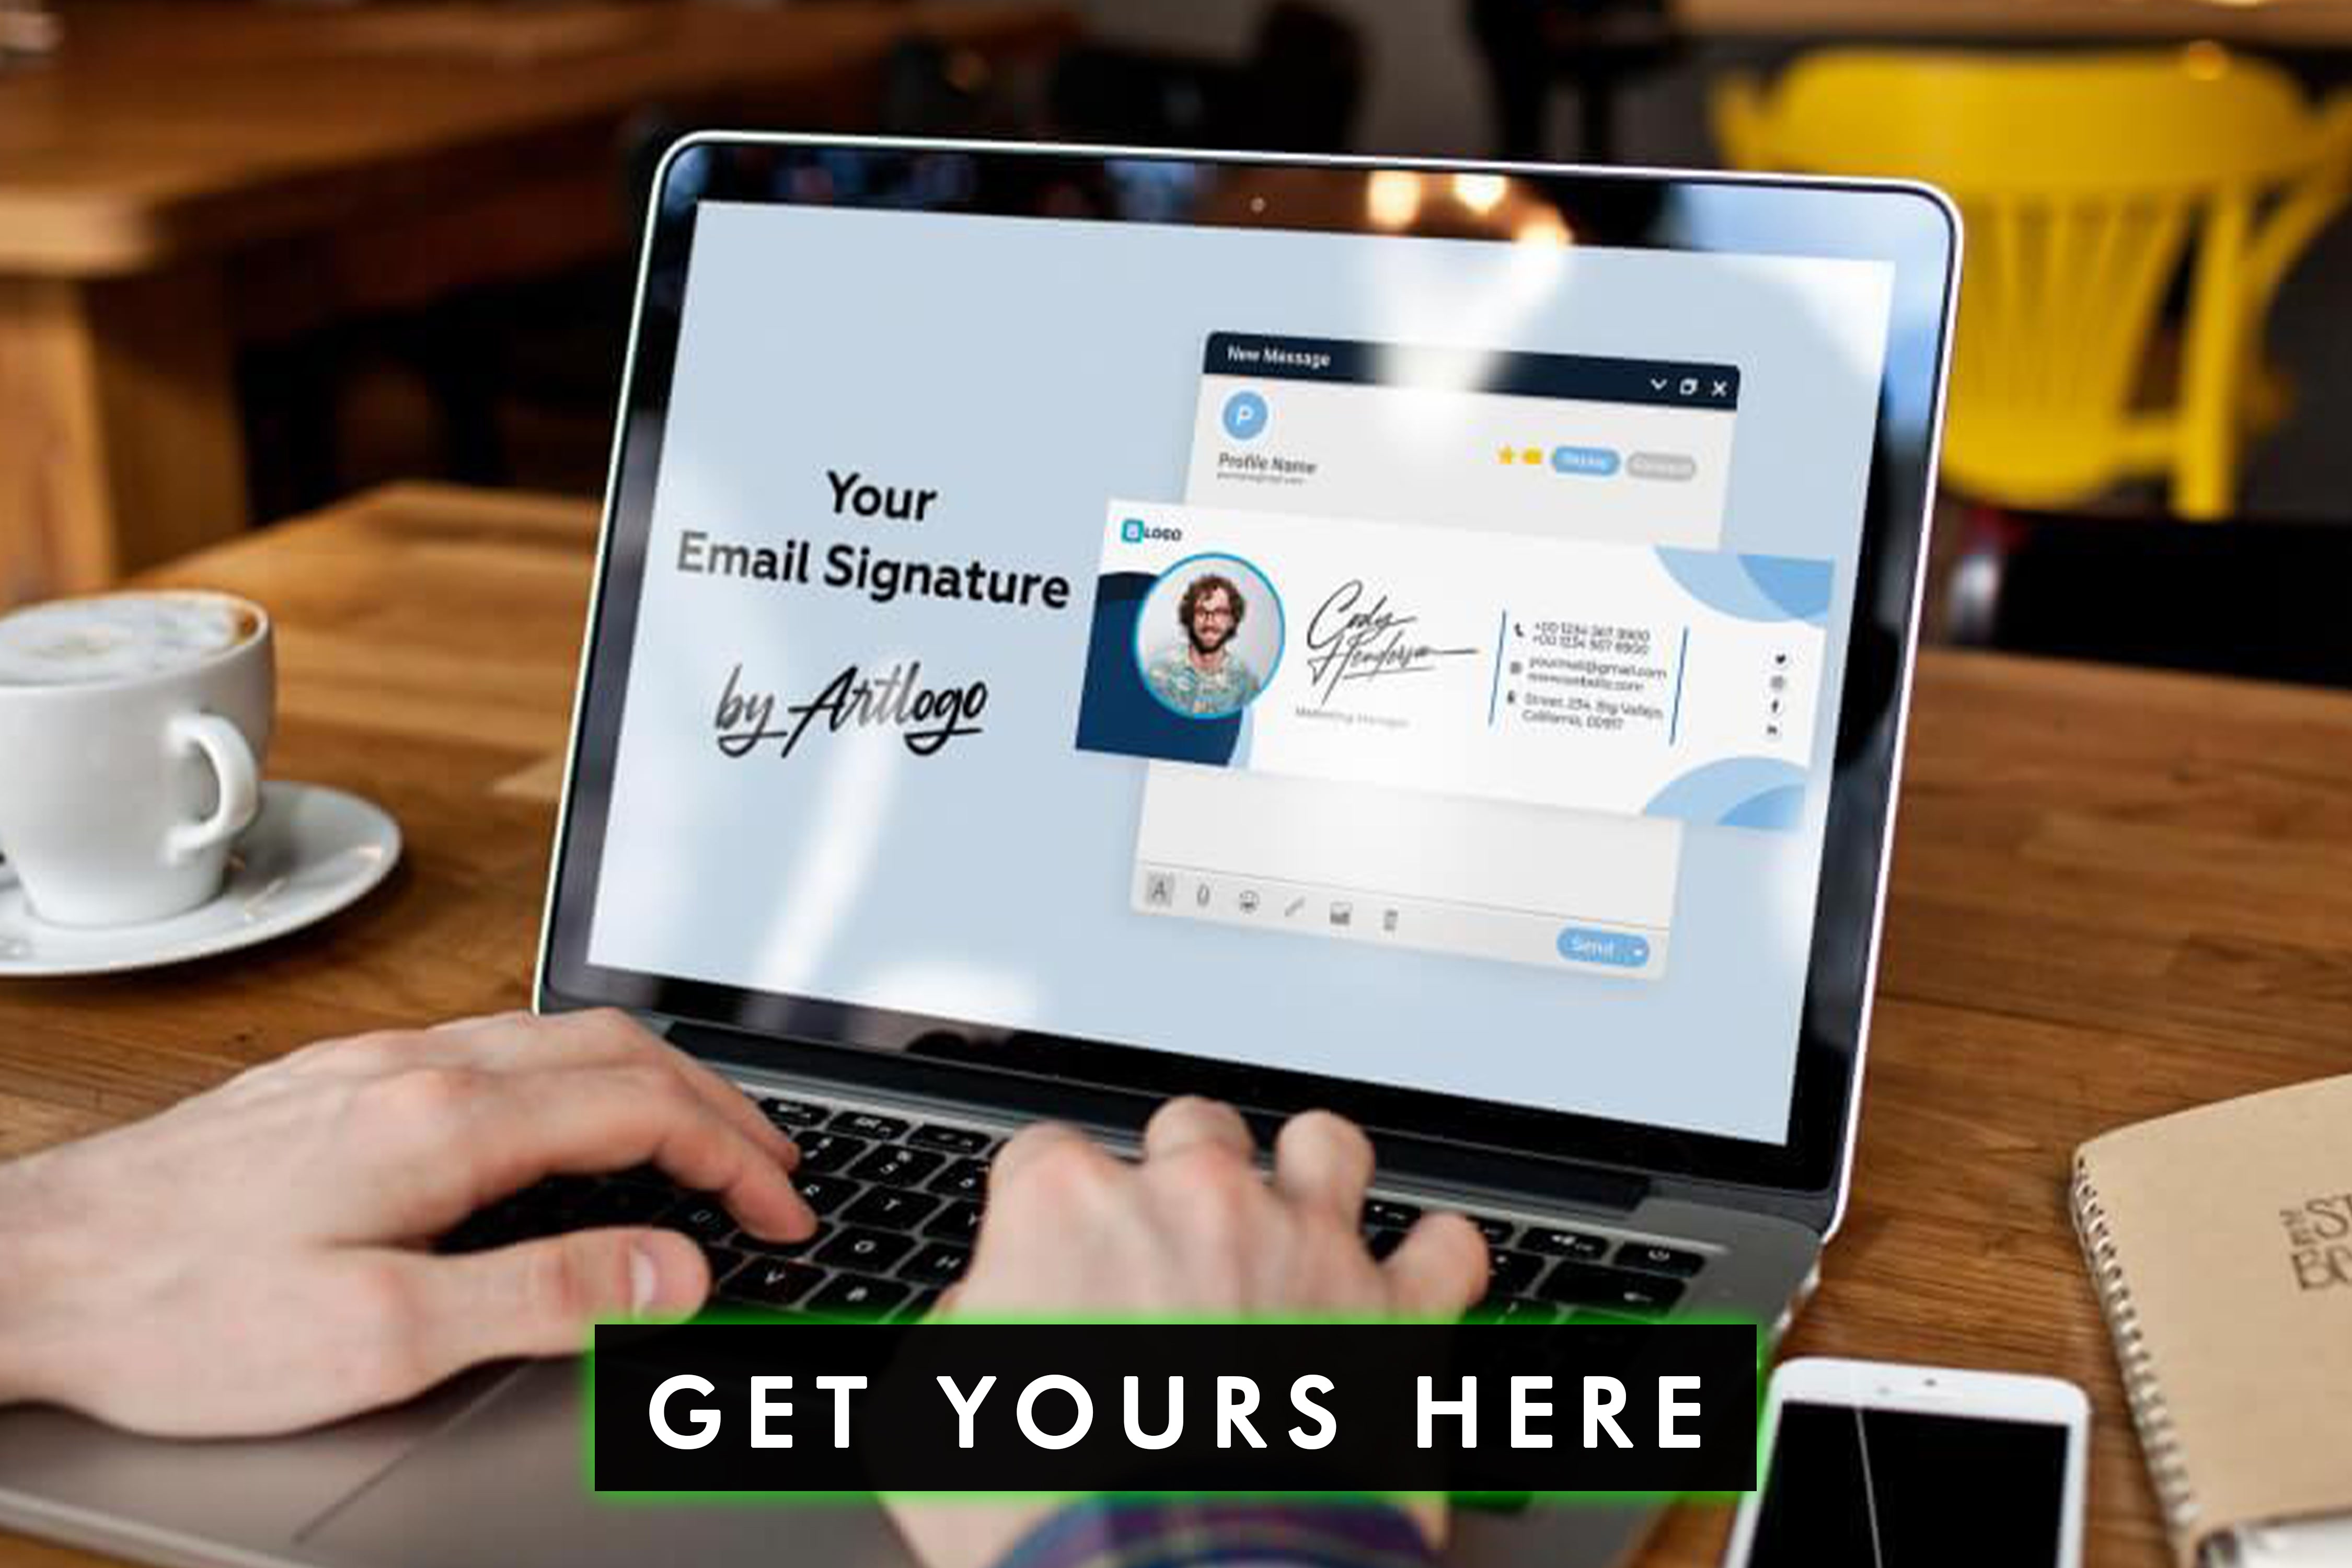 Enhance your brand image and ensure consistency with a standardized company email signature that represents your brand values and identity.